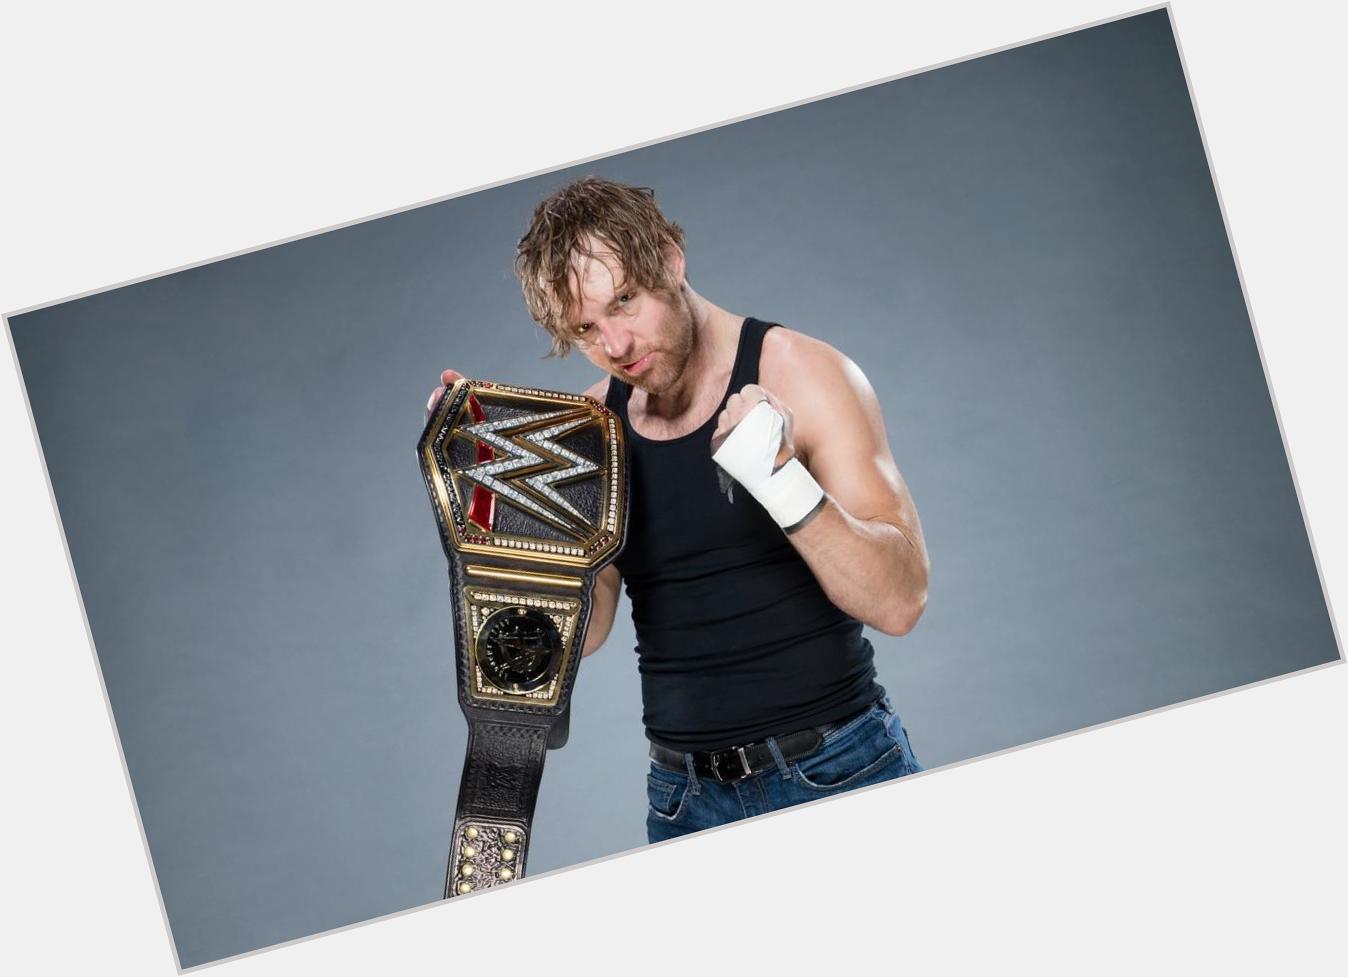 A Very Happy Birthday to the Lunatic Fringe and Former WWE Champion Dean Ambrose. 